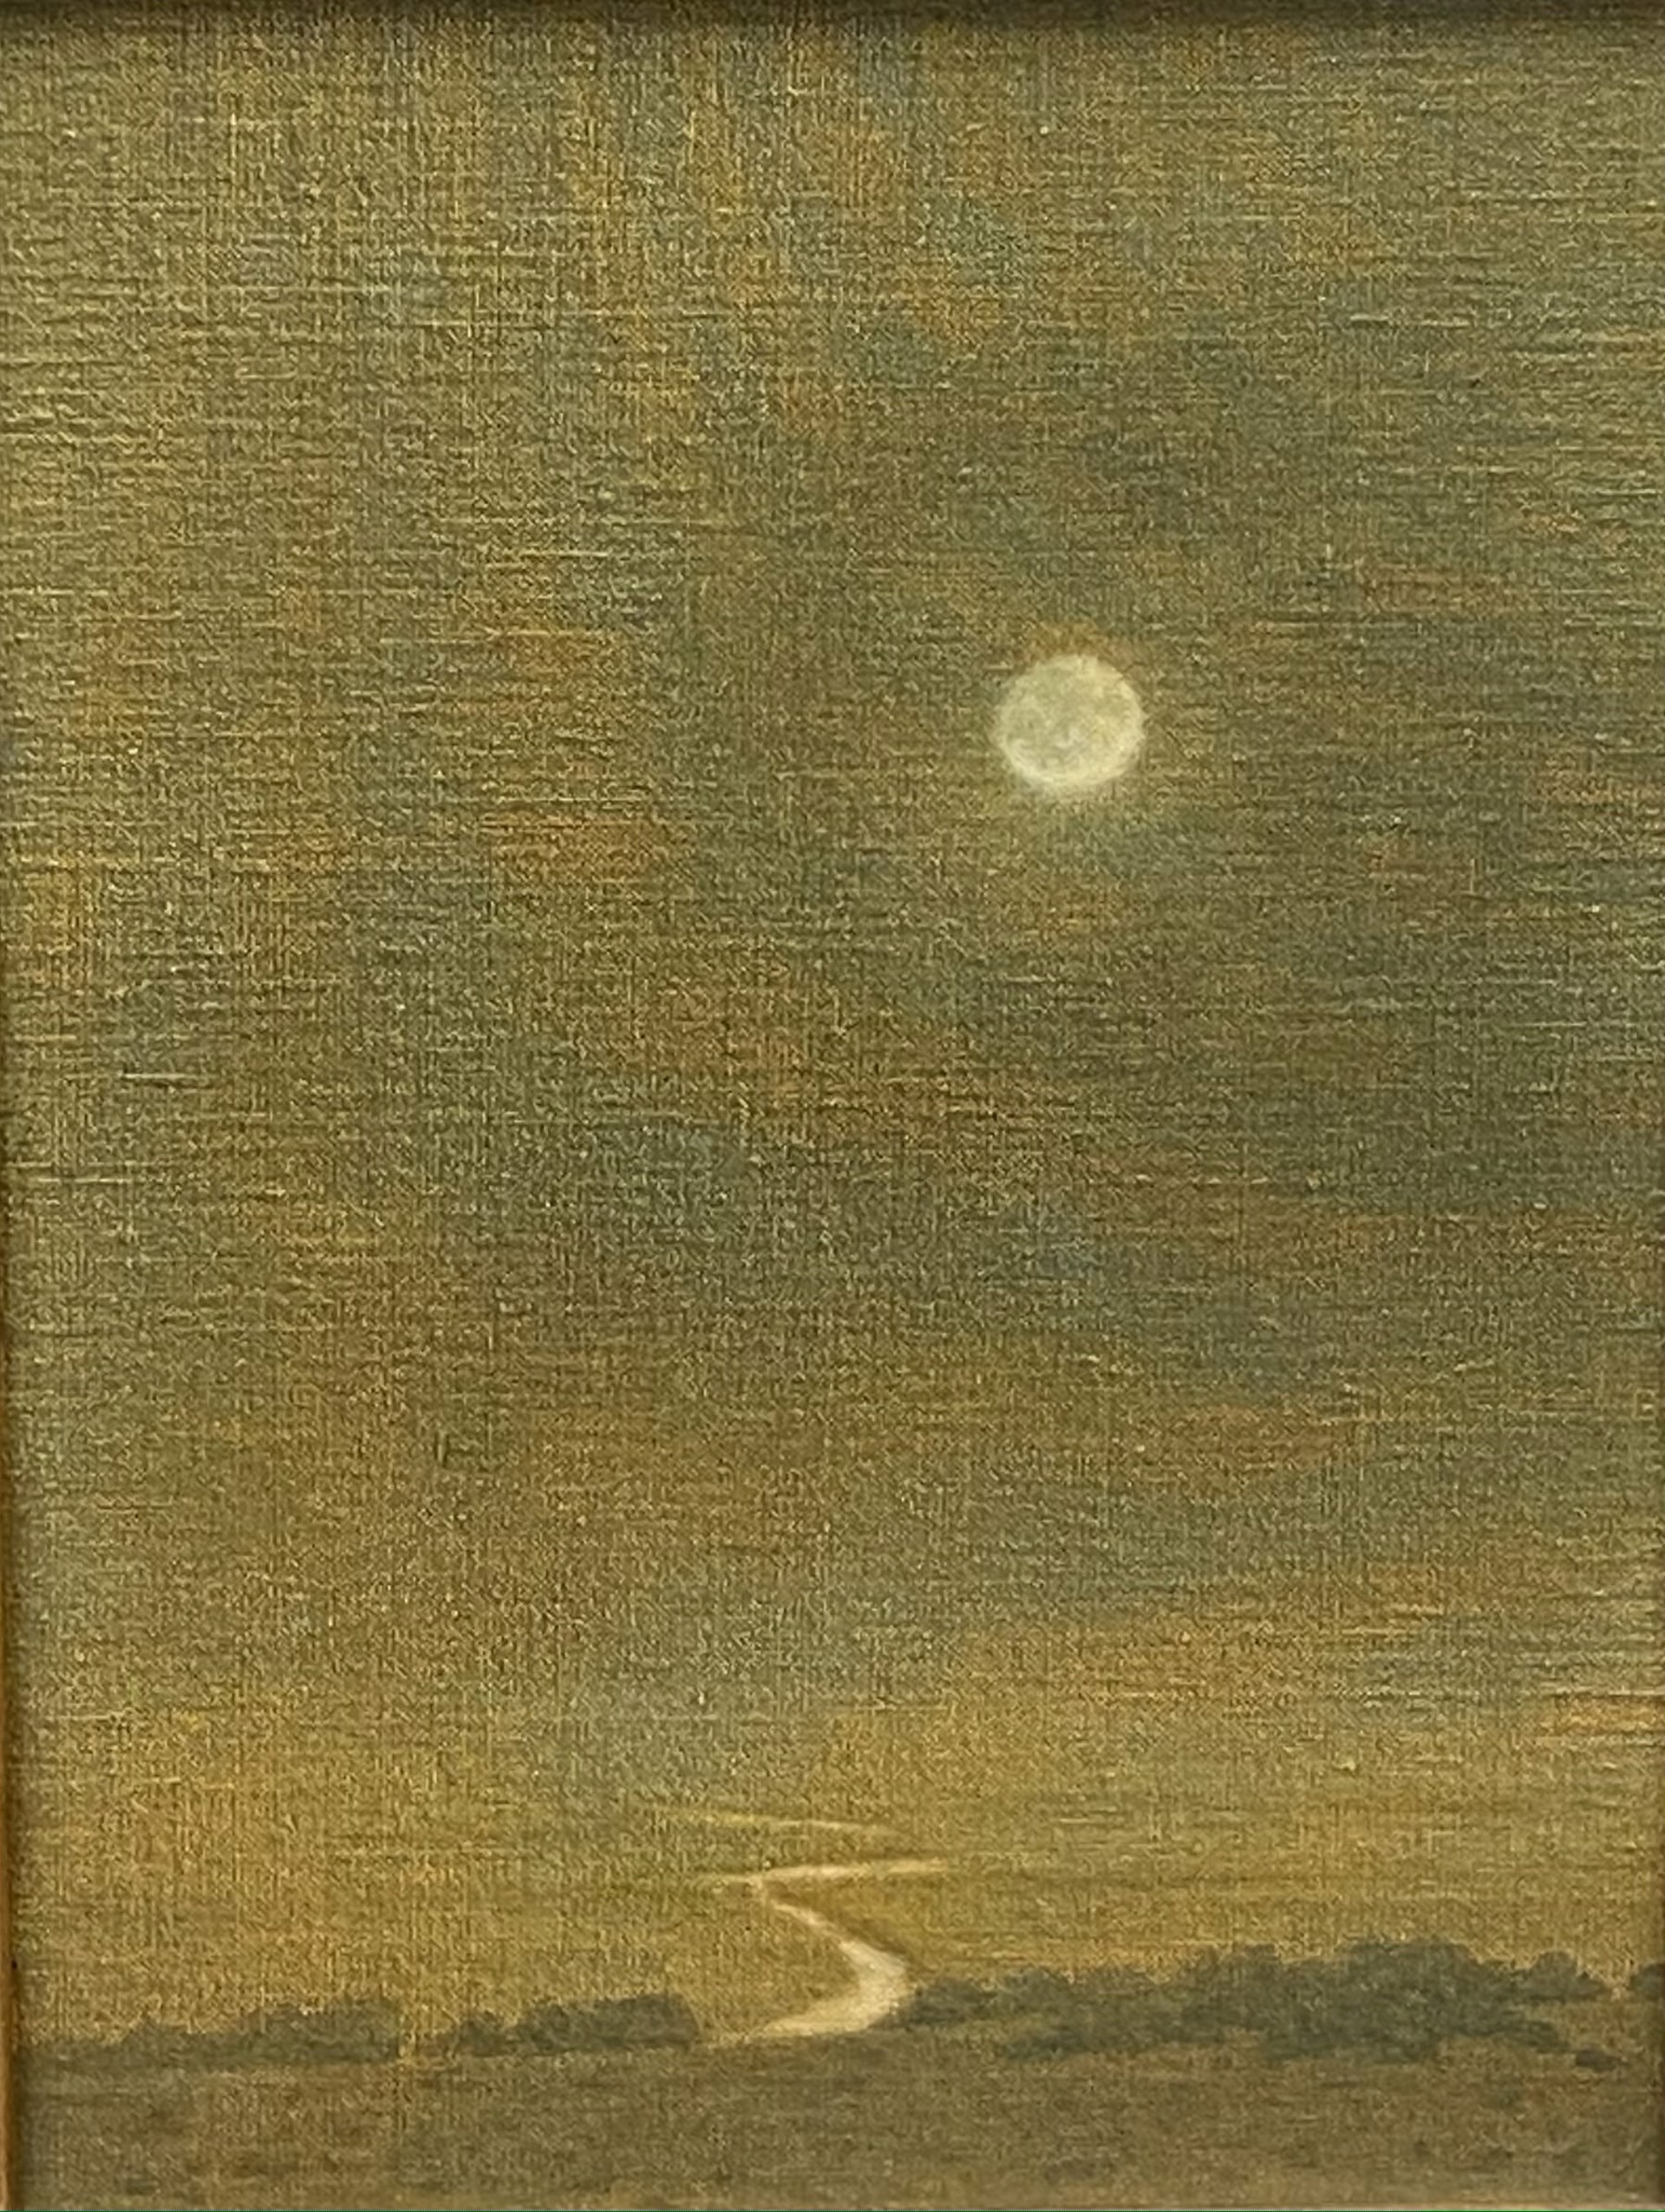 MUSSELSHELL FULL MOON by William "Lucky" Davis